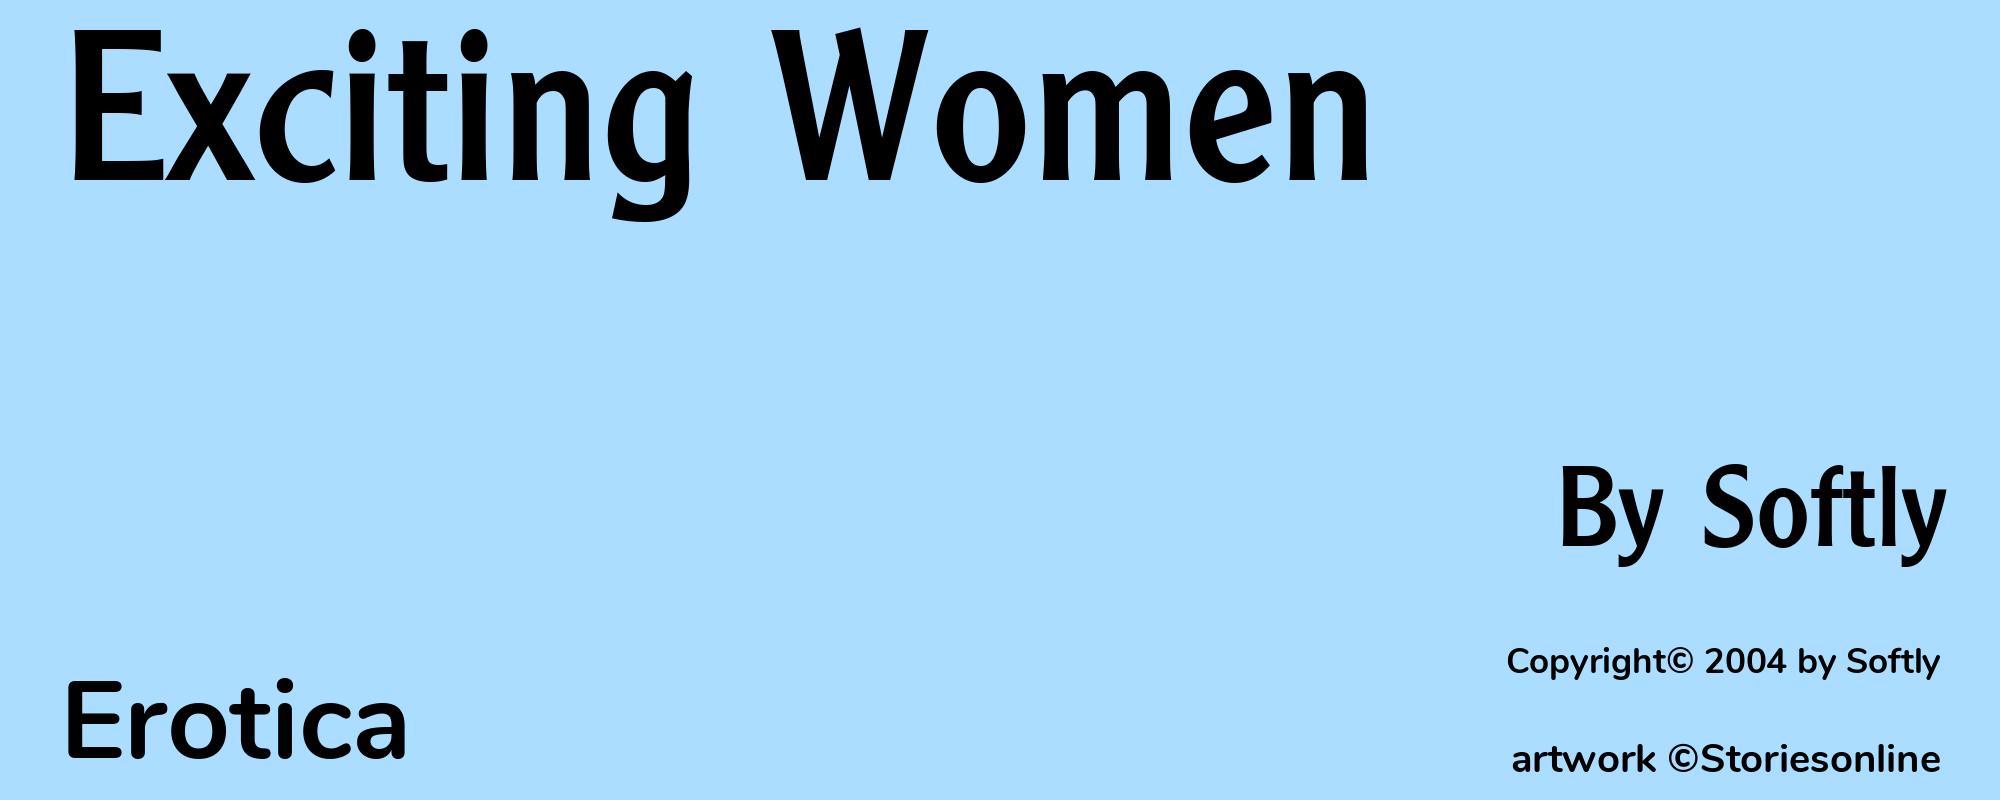 Exciting Women - Cover